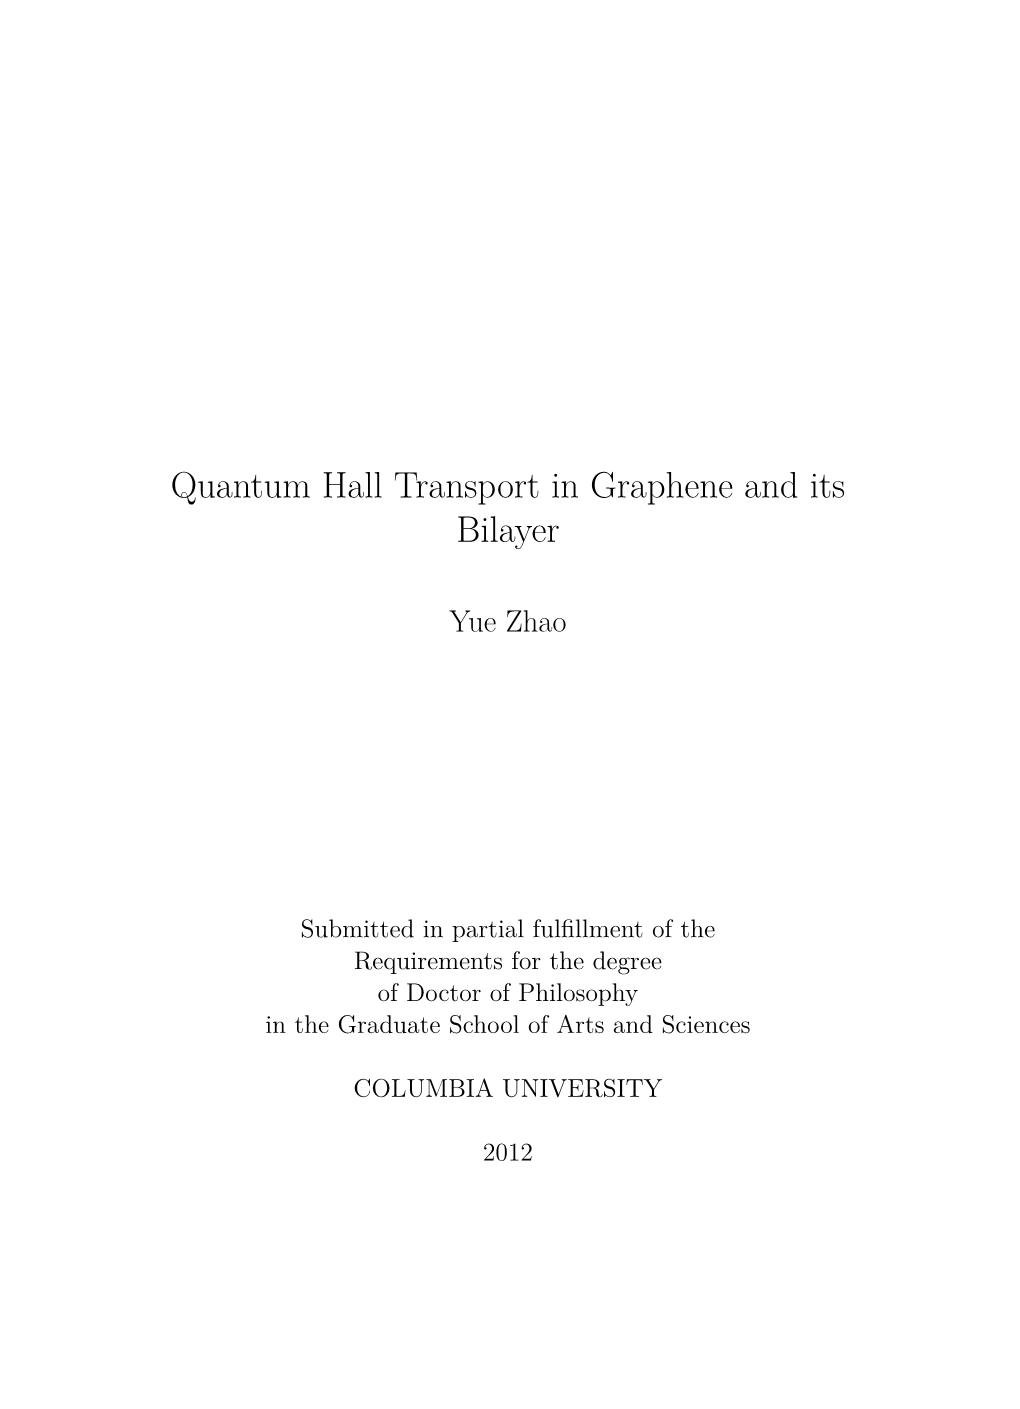 Quantum Hall Transport in Graphene and Its Bilayer